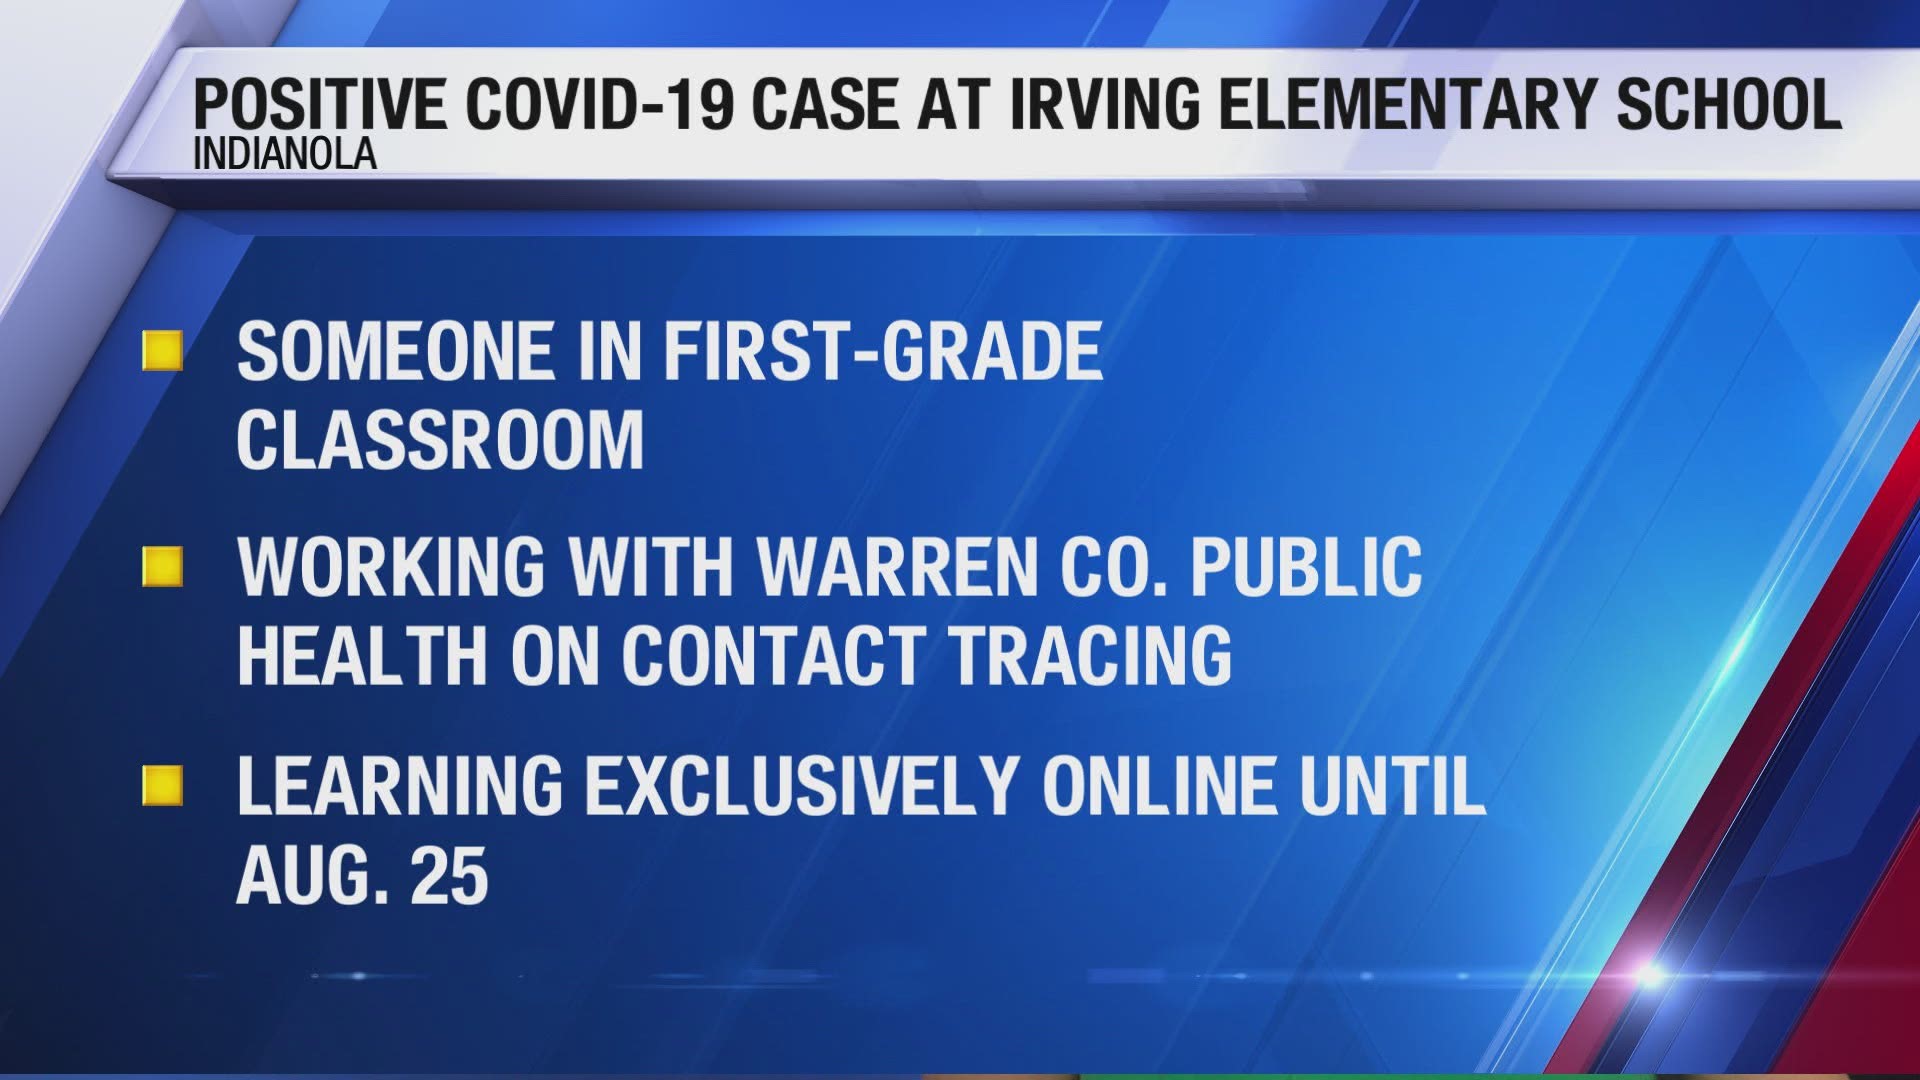 A whole first grade classroom will learn exclusively online until August 25 because of a positive coronavirus case within.